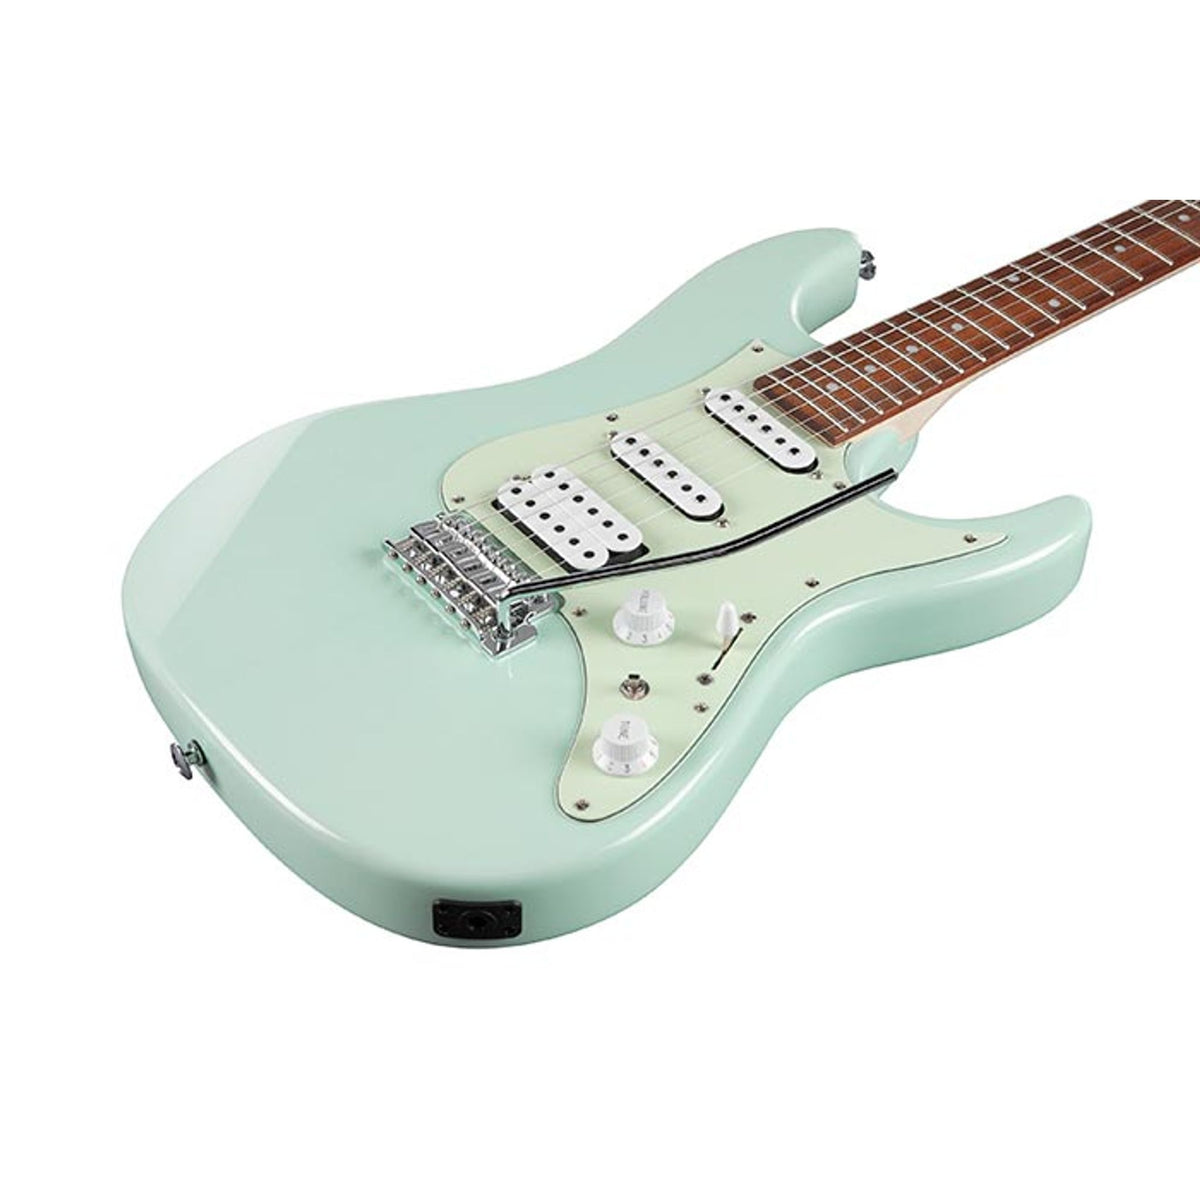 Ibanez AZES40 Electric Guitar Mint Green